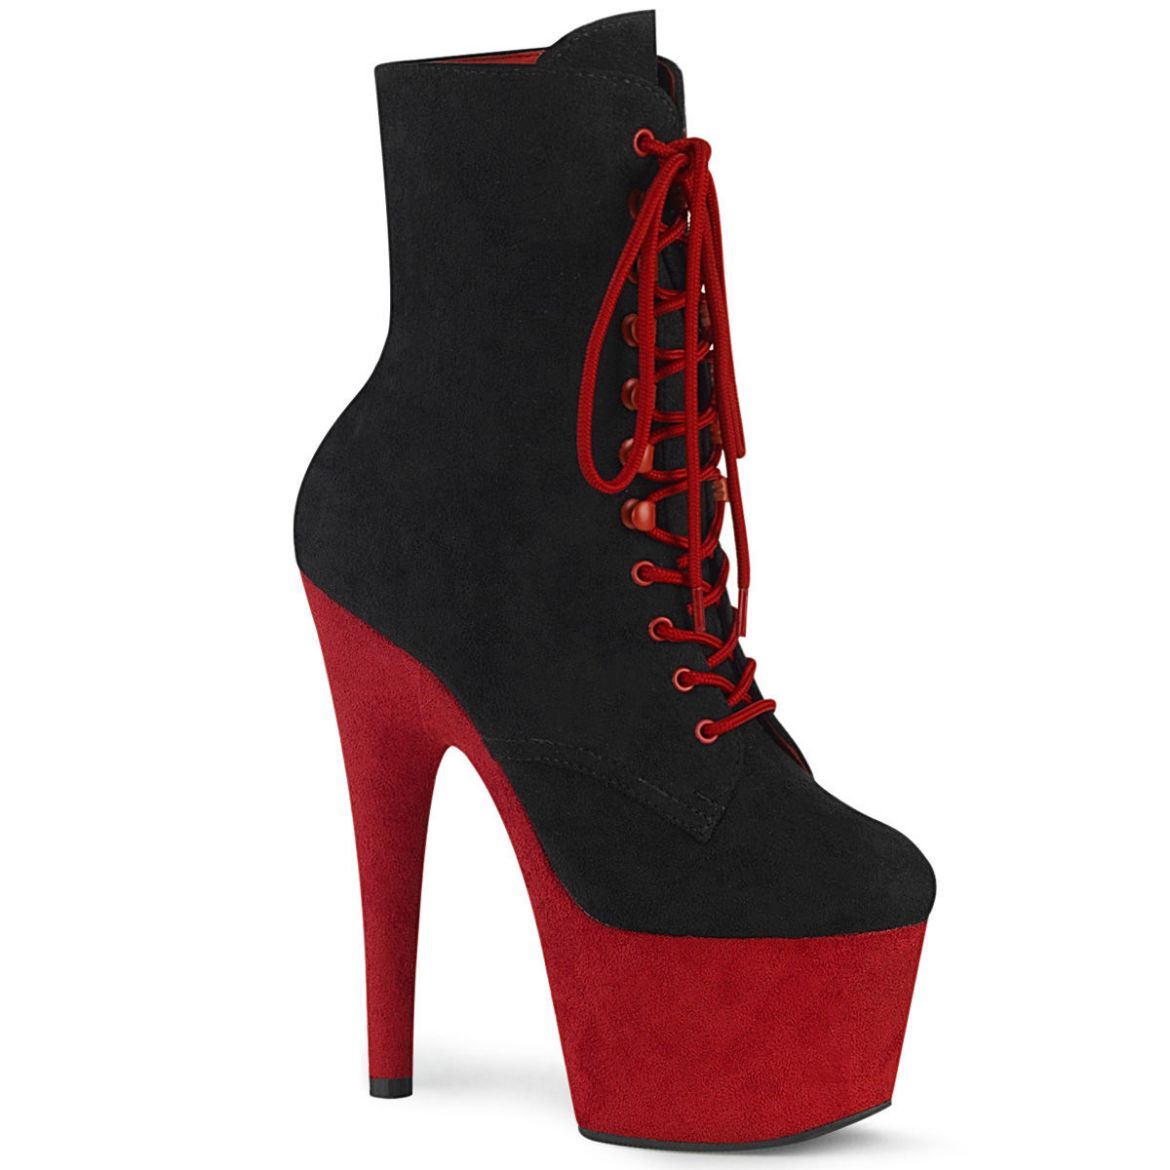 Product image of Pleaser ADORE-1020FSTT Black Faux Suede/Red Faux Suede 7 inch (17.8 cm) Heel 2 3/4 inch (7 cm) Platform Two Tone Lace-Up Ankle Boot Side Zip